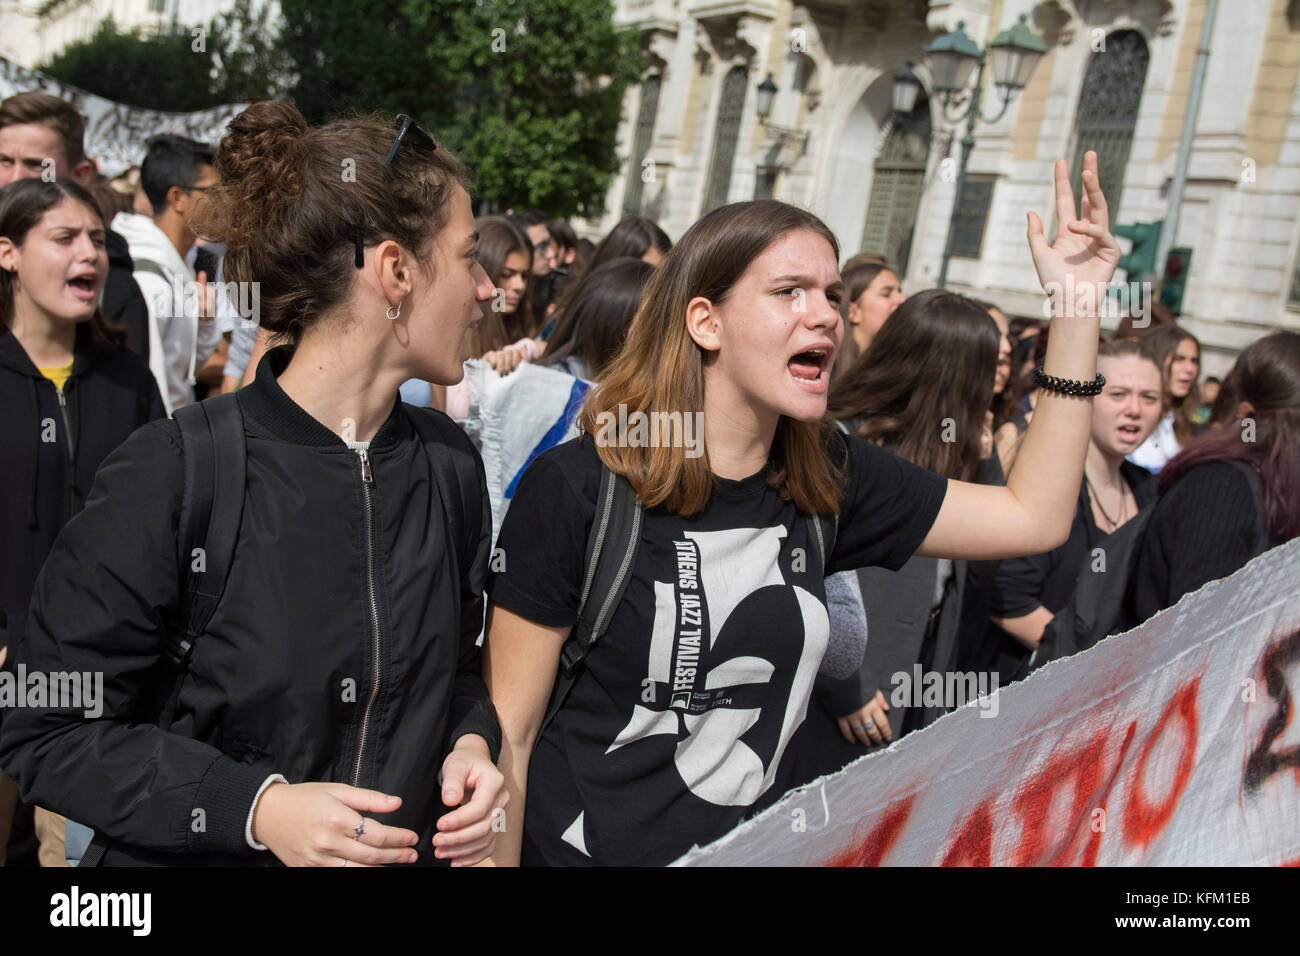 Athens, Greece. 30th October, 2017. Students rally holding banners and shouting slogans against the government. Thousands elementary school students took to the streets to demonstrate against reforms in education and staff shortage. © Nikolas Georgiou / Alamy Live News Stock Photo